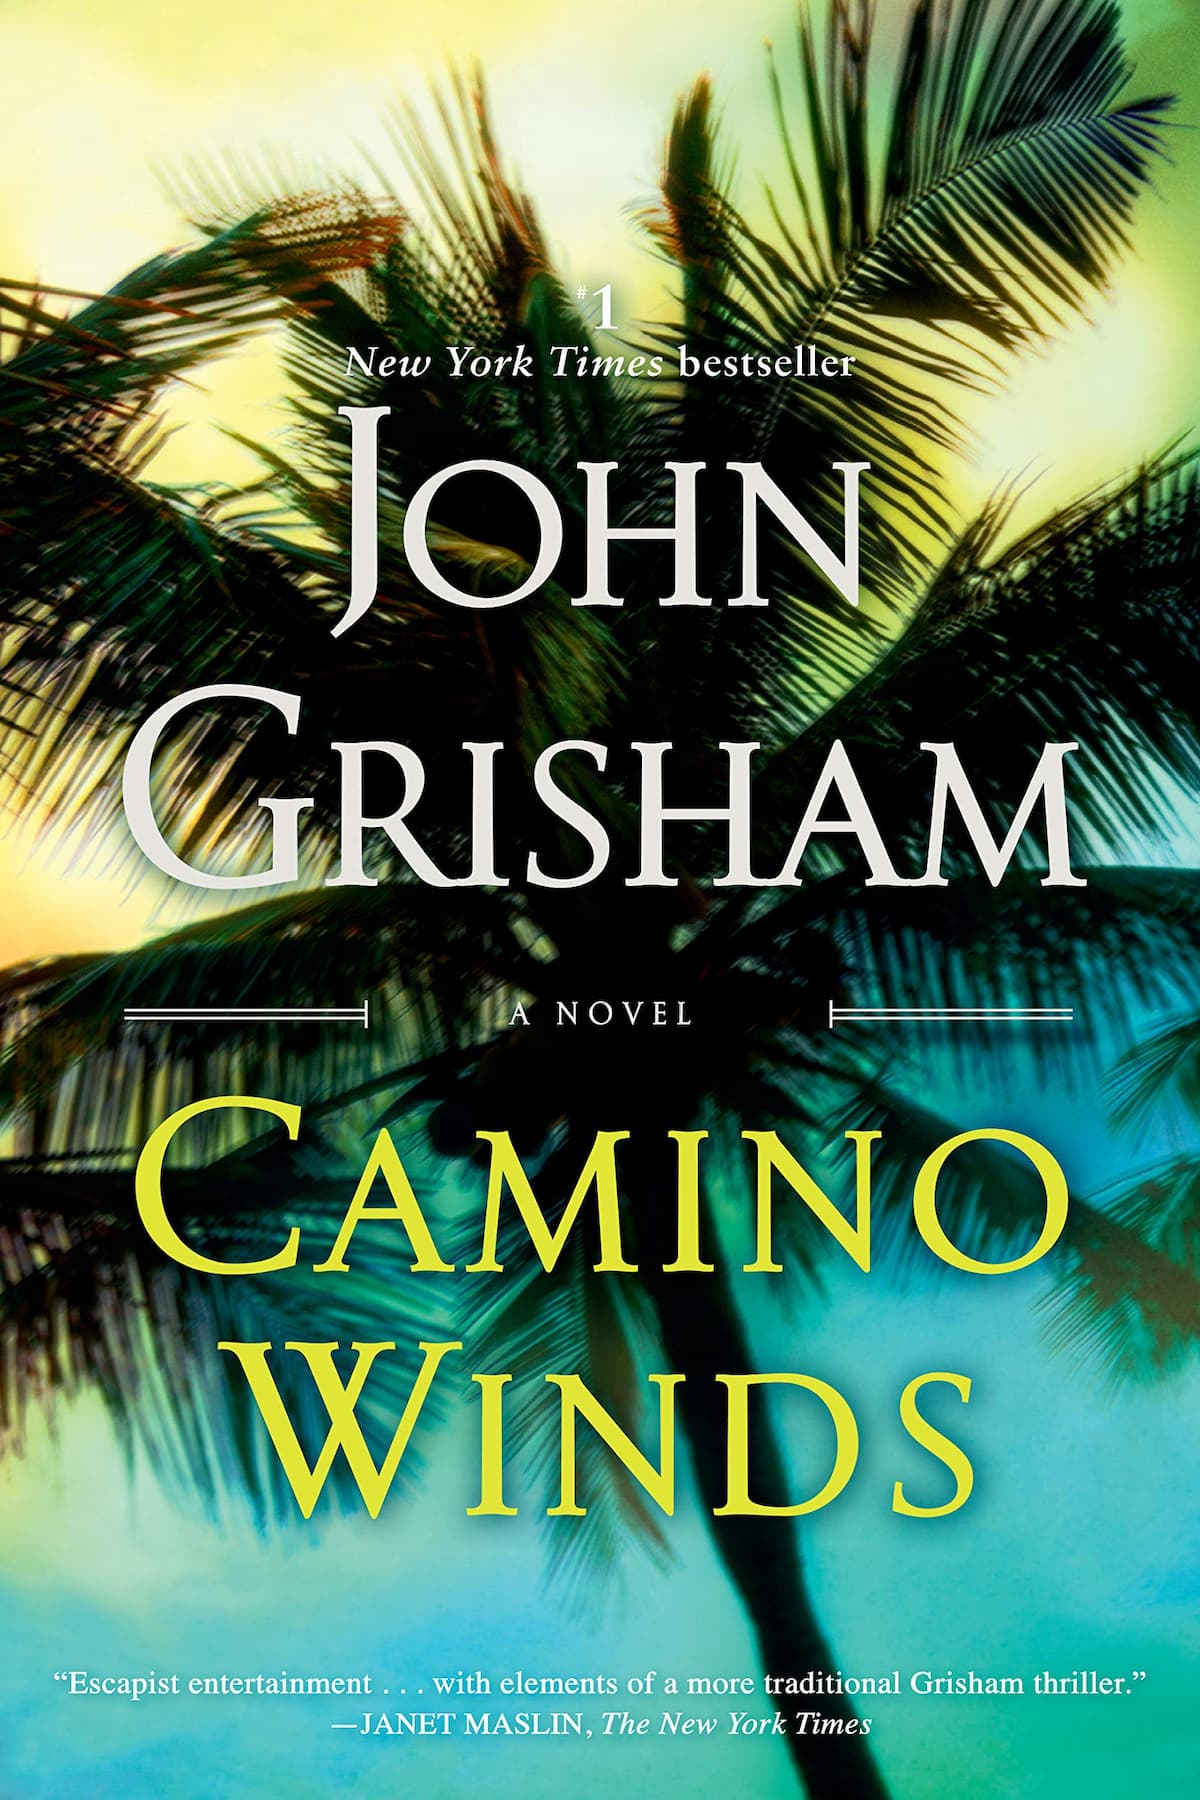 Camino Winds - John Grisham (Camino Island Series Book 2) can be a great help to those who seek to recharge their energy levels during the holidays.